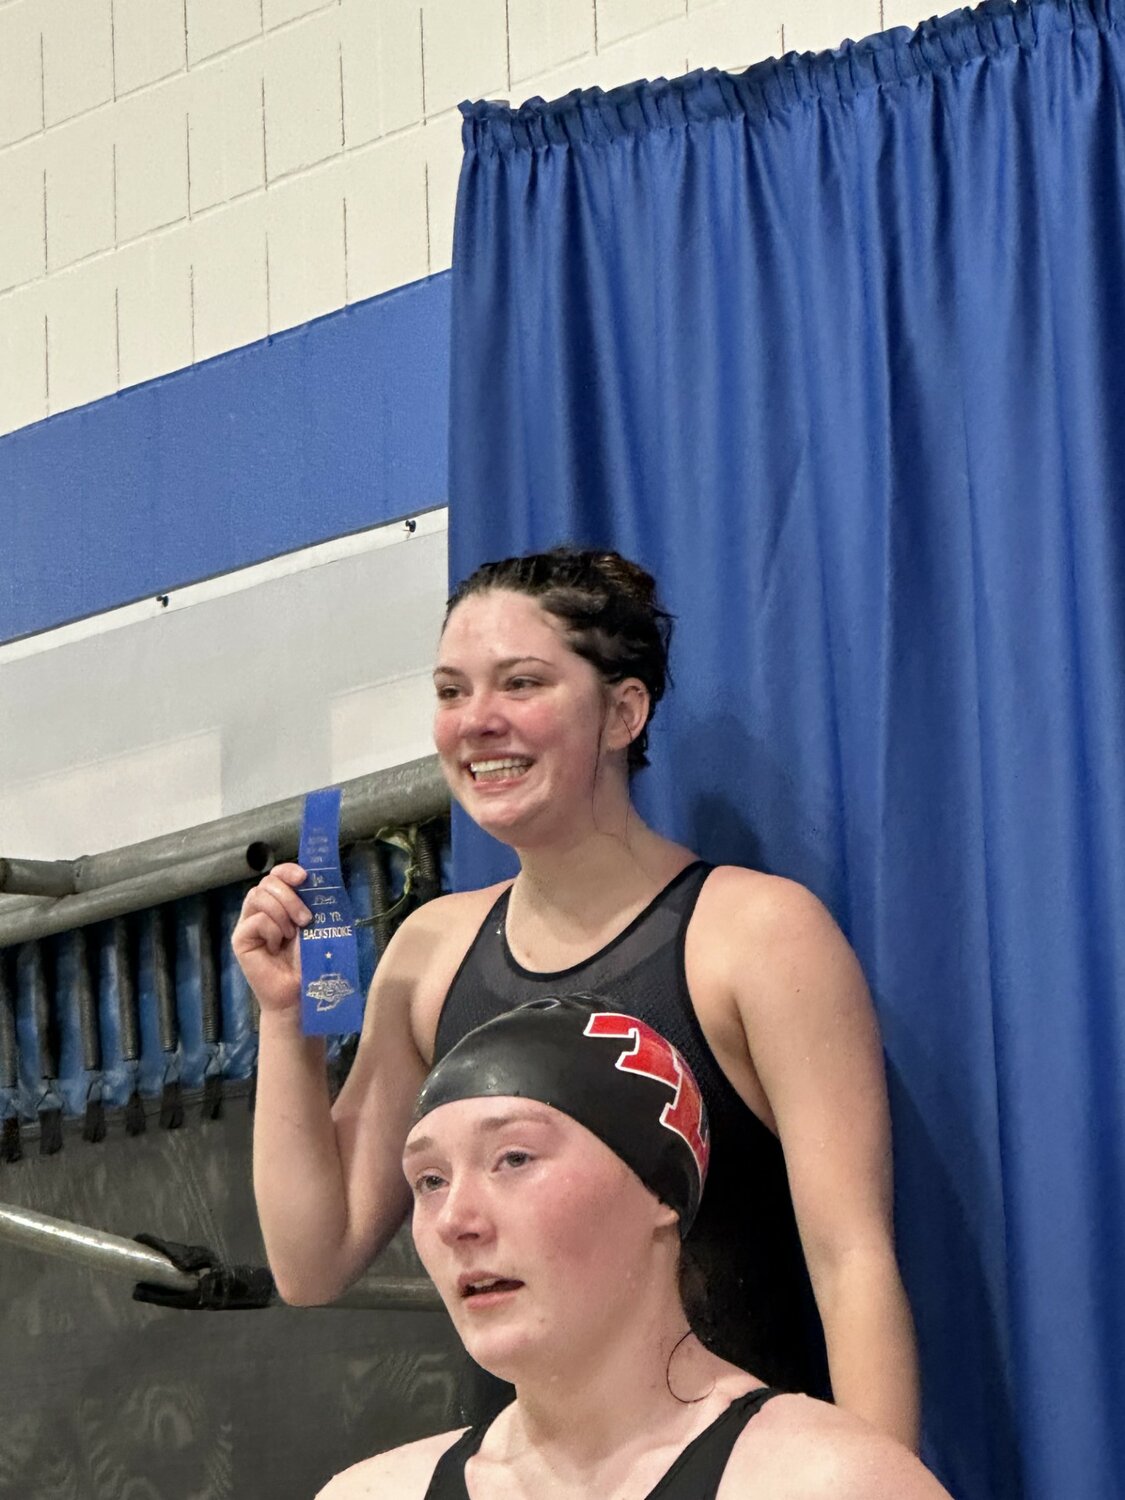 North's Dusty Robinson will be making her first appearance at the state finals after being named the sectional champion in the 100 backstroke.